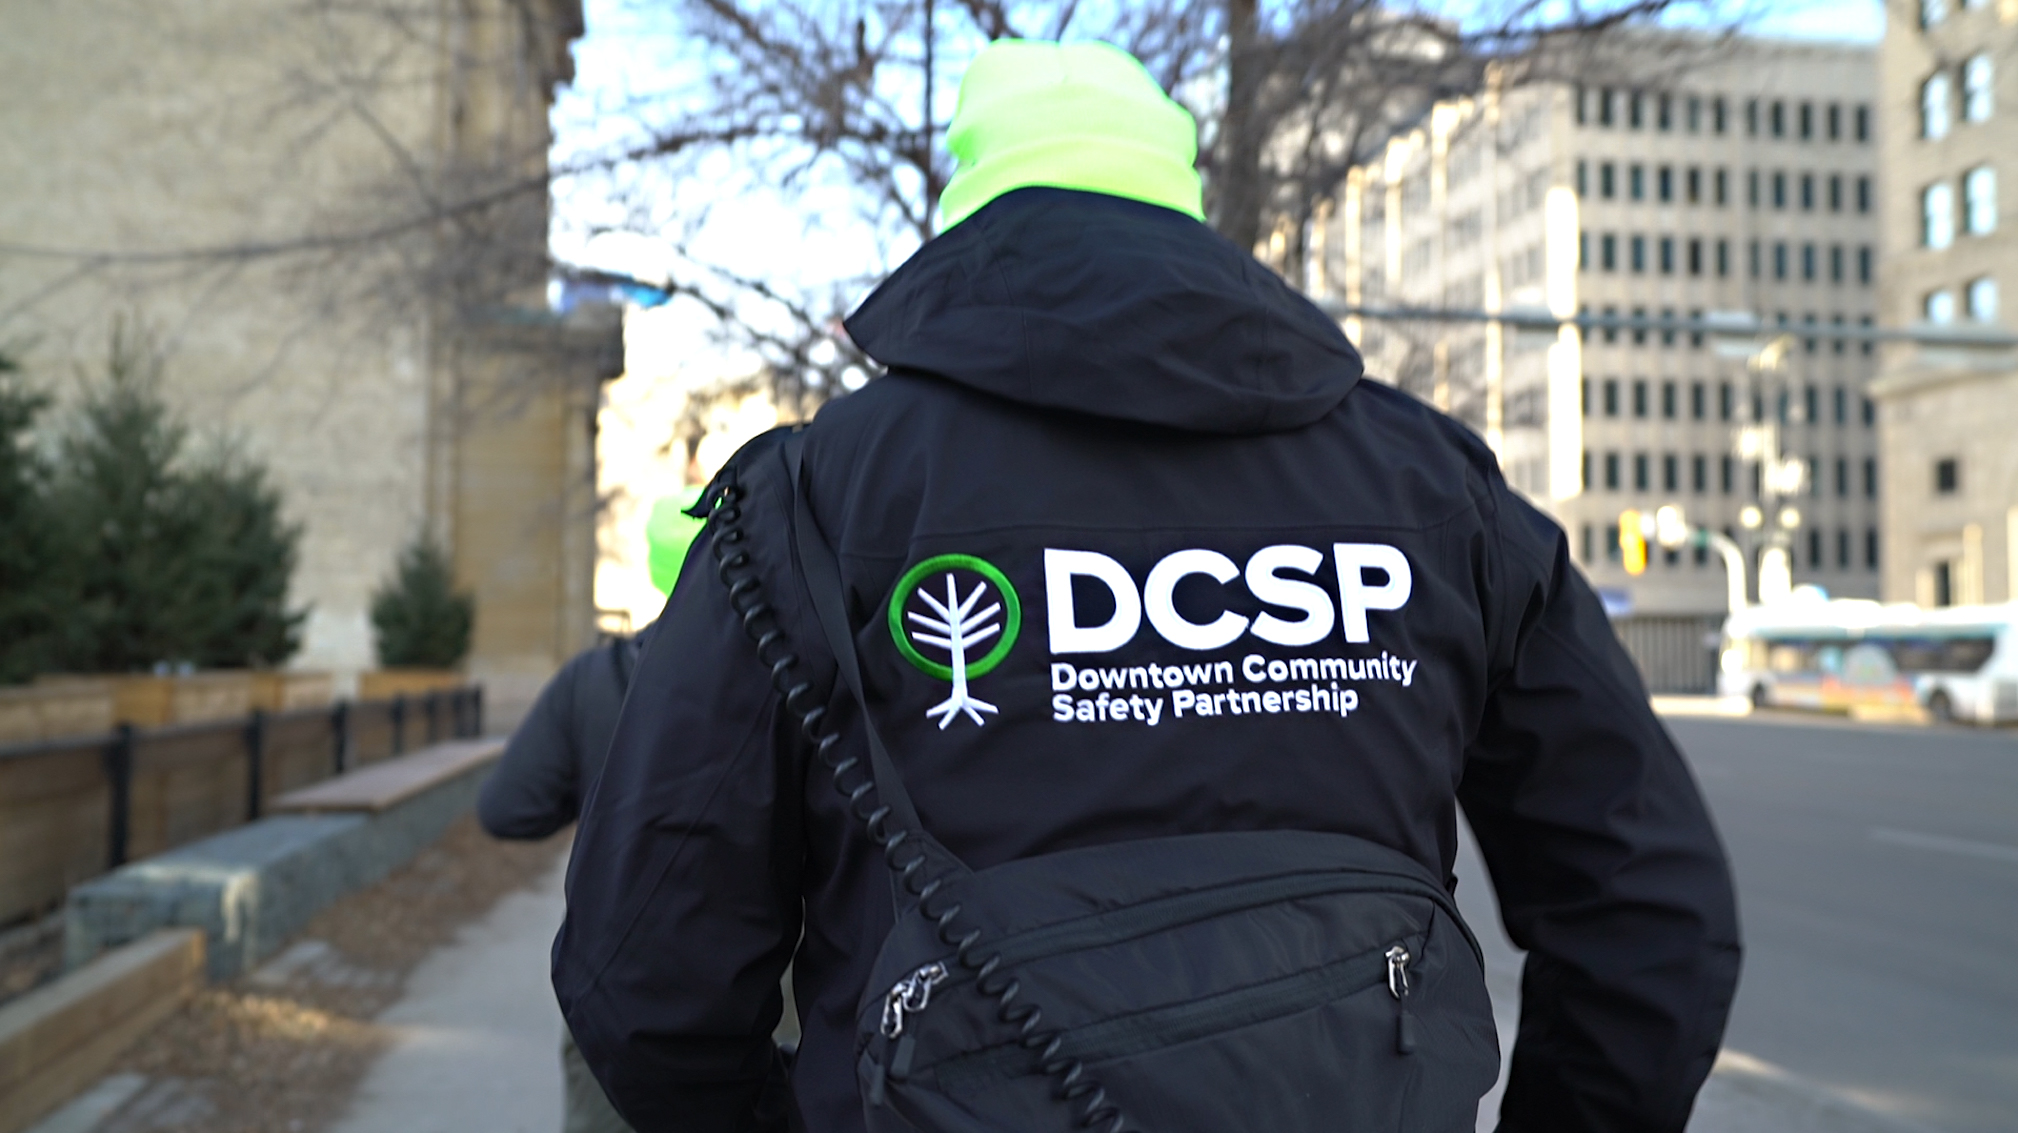 Safety and Outreach team DCSP CONNECT hits the streets with a new look